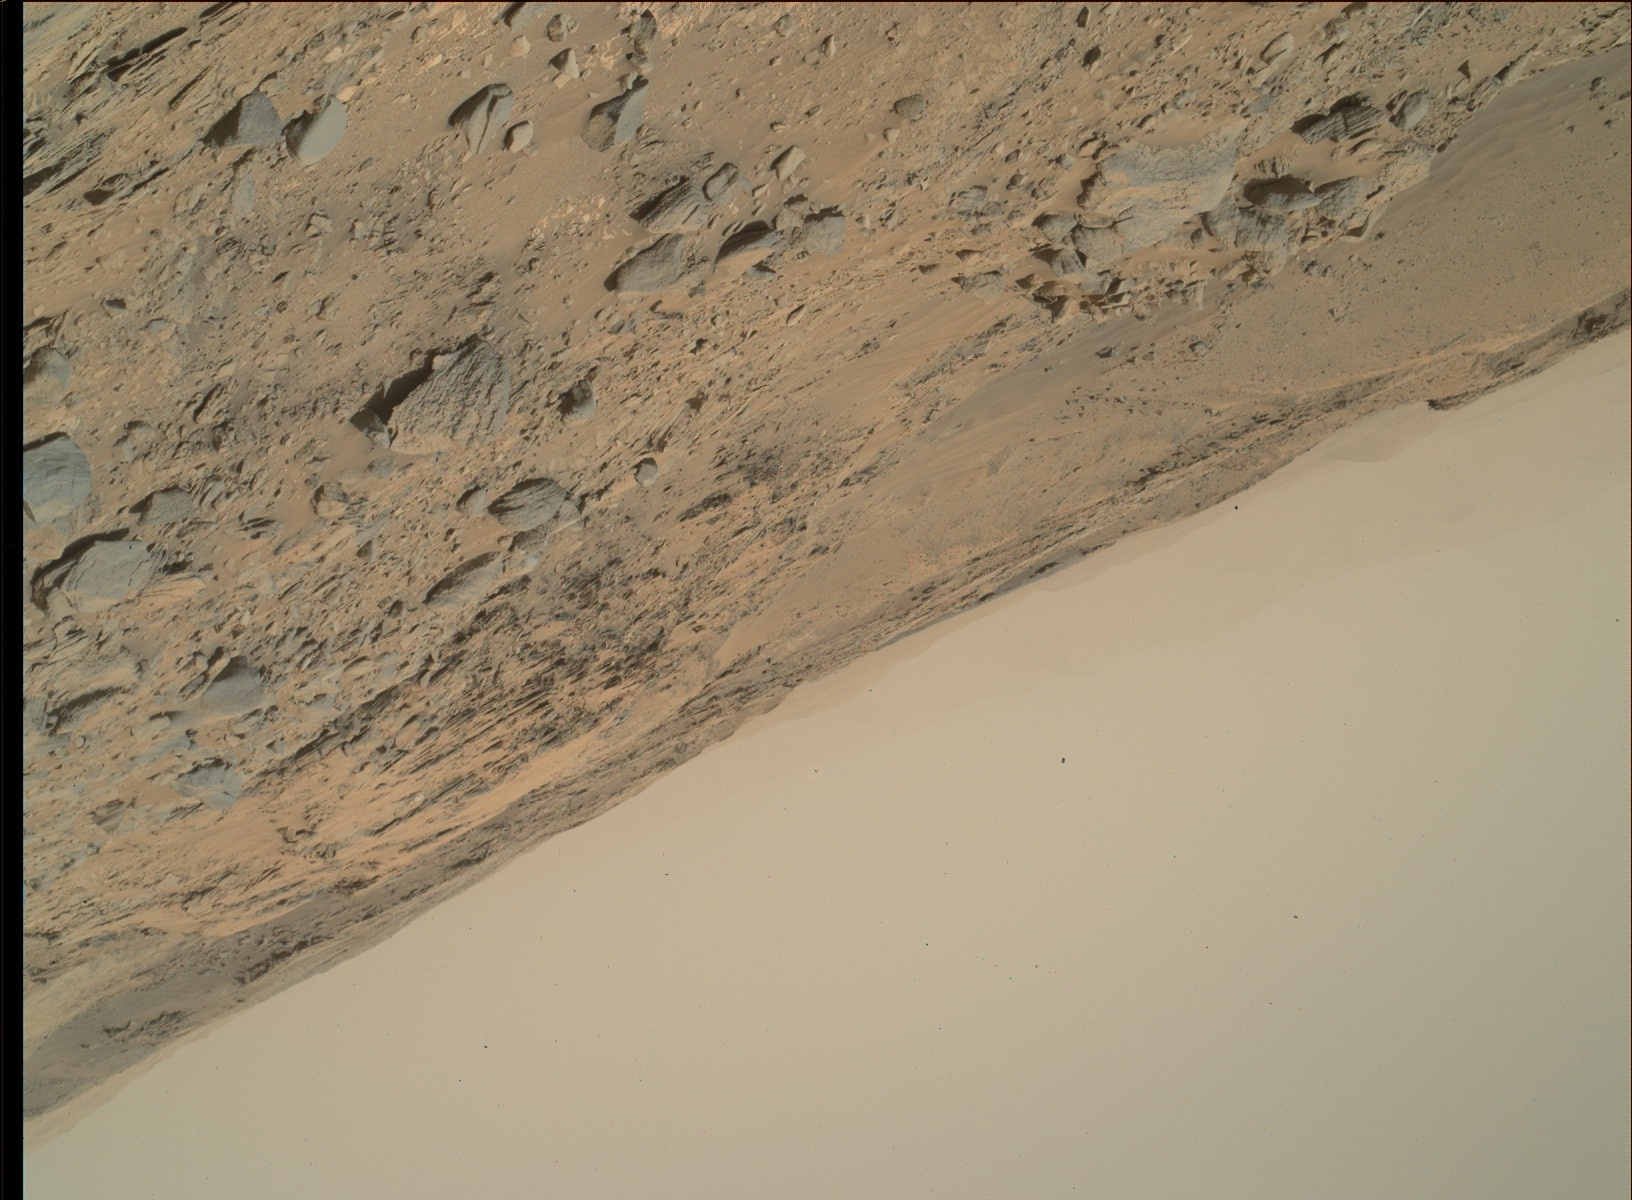 Nasa's Mars rover Curiosity acquired this image using its Mars Hand Lens Imager (MAHLI) on Sol 1094